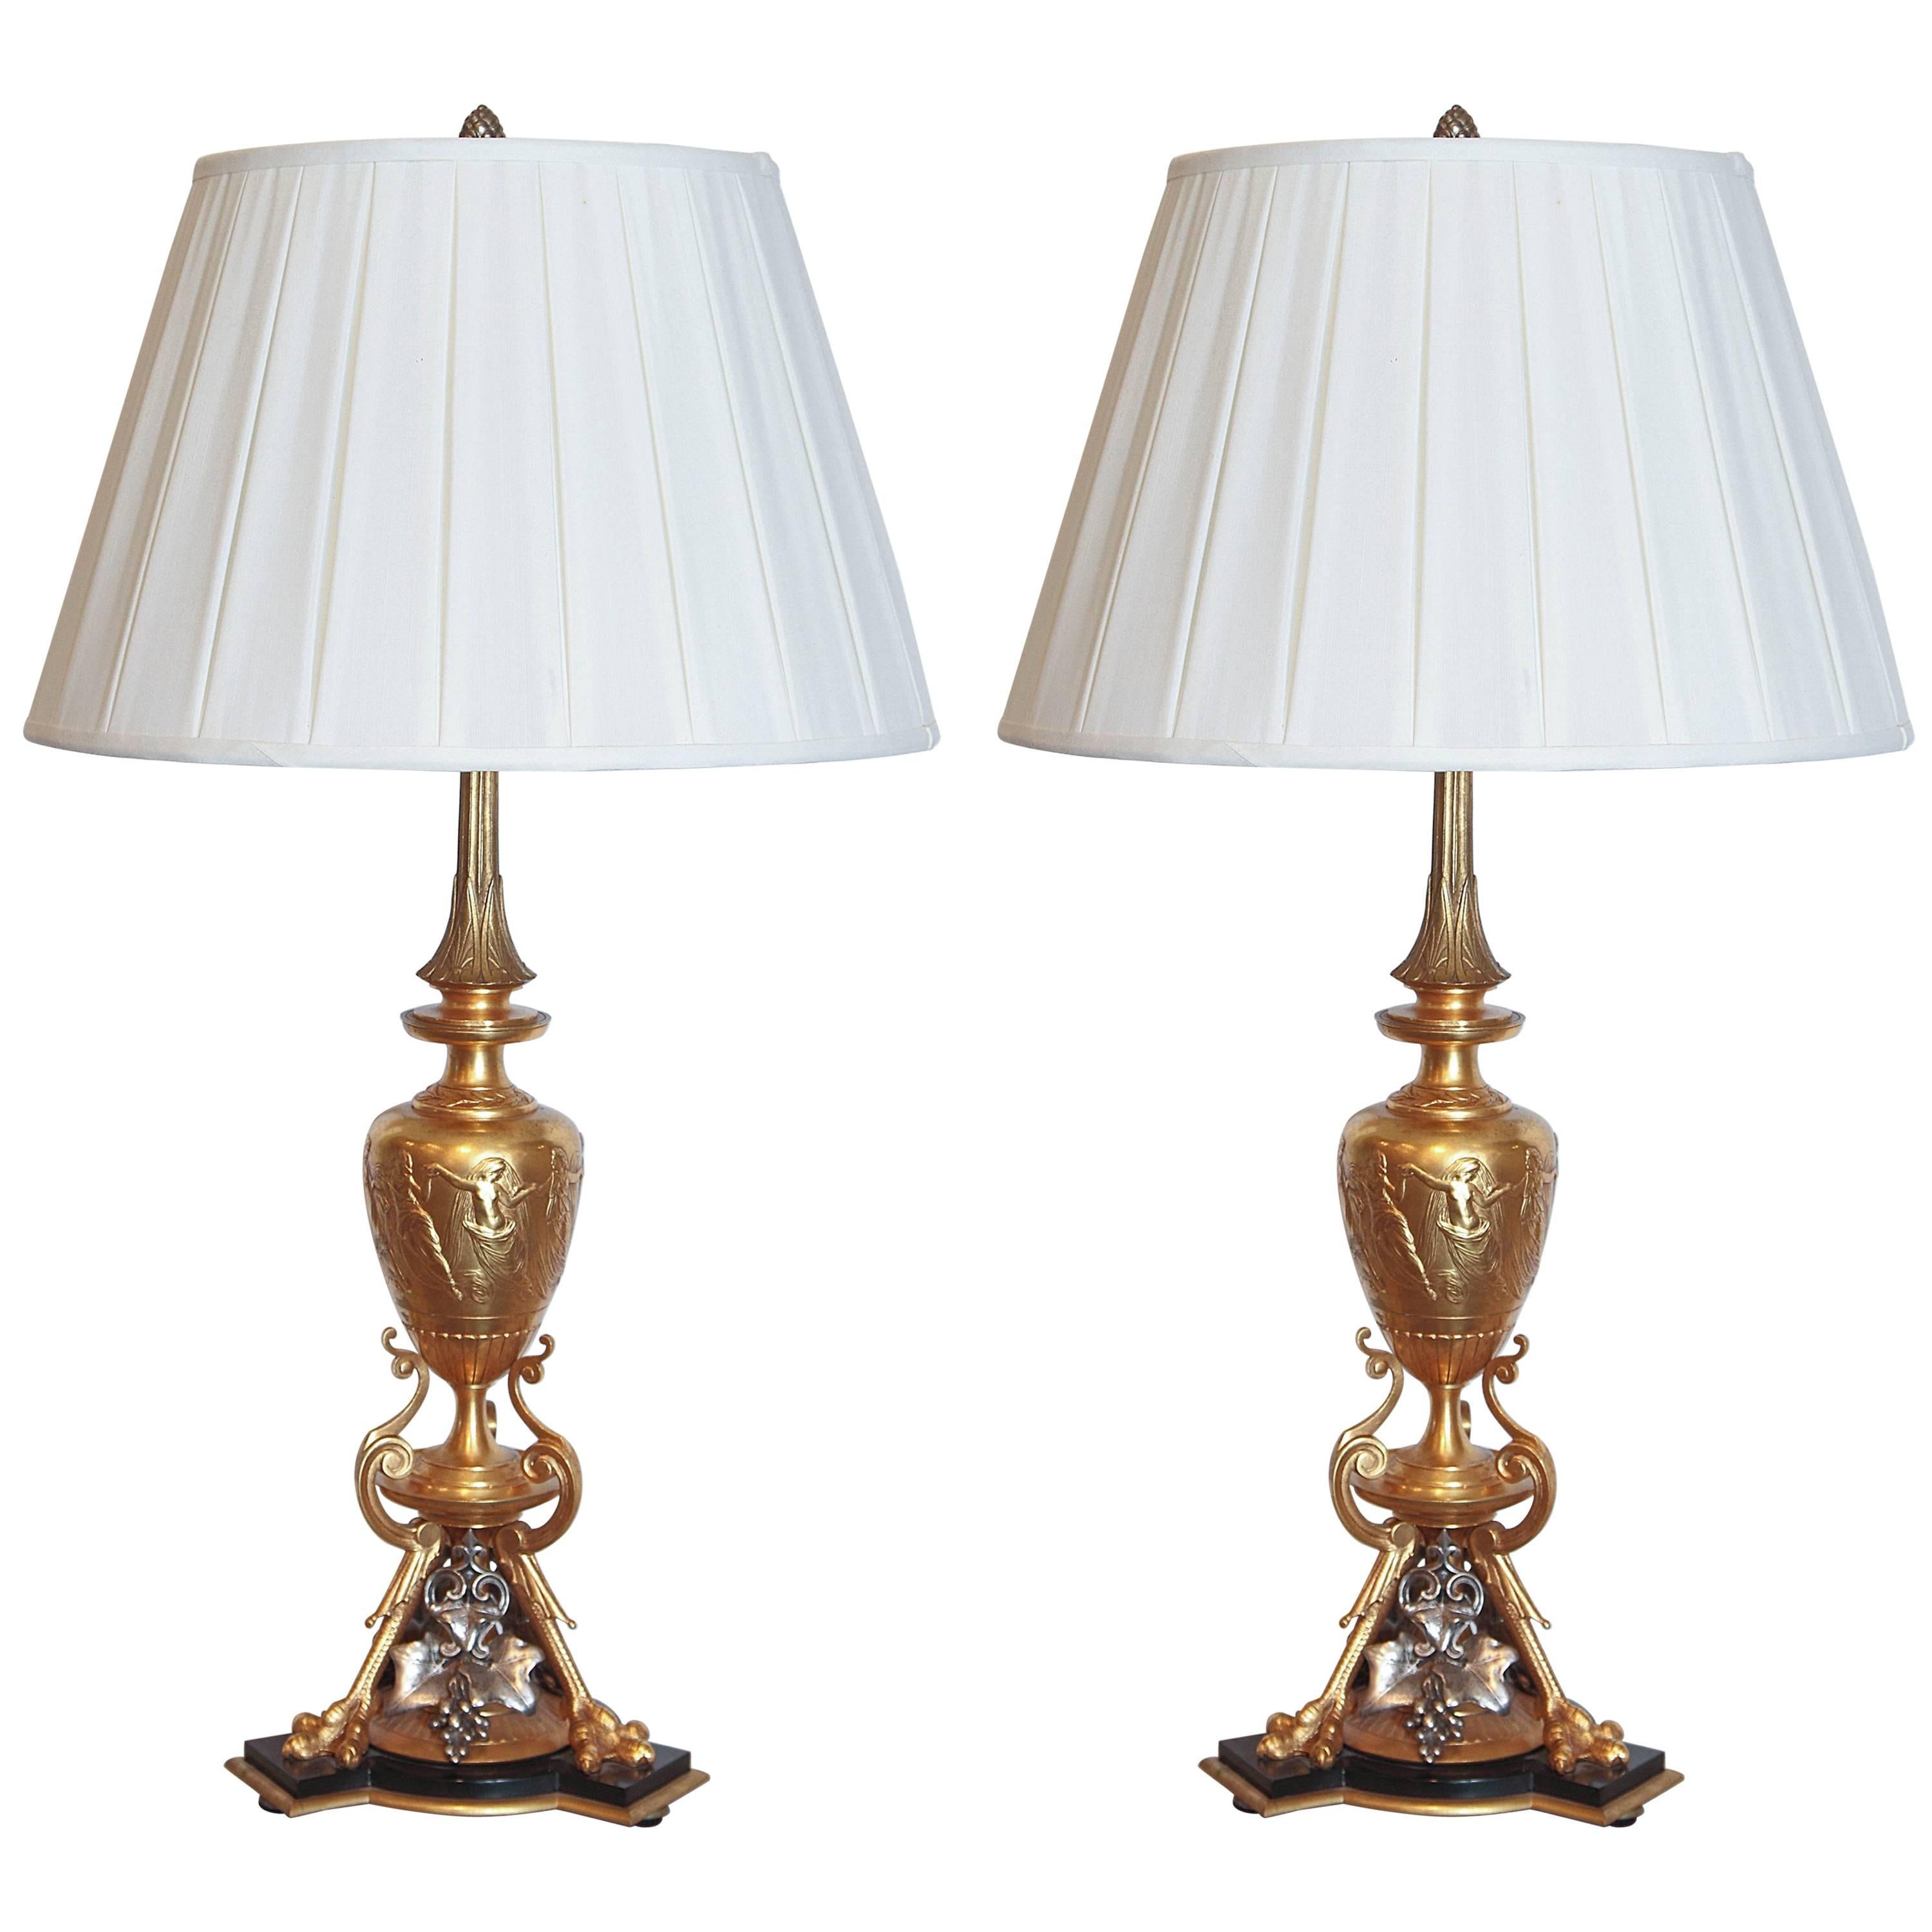 Pair of 19th Century Classical Urn Shaped Lamps with Silver and Bronze Doré